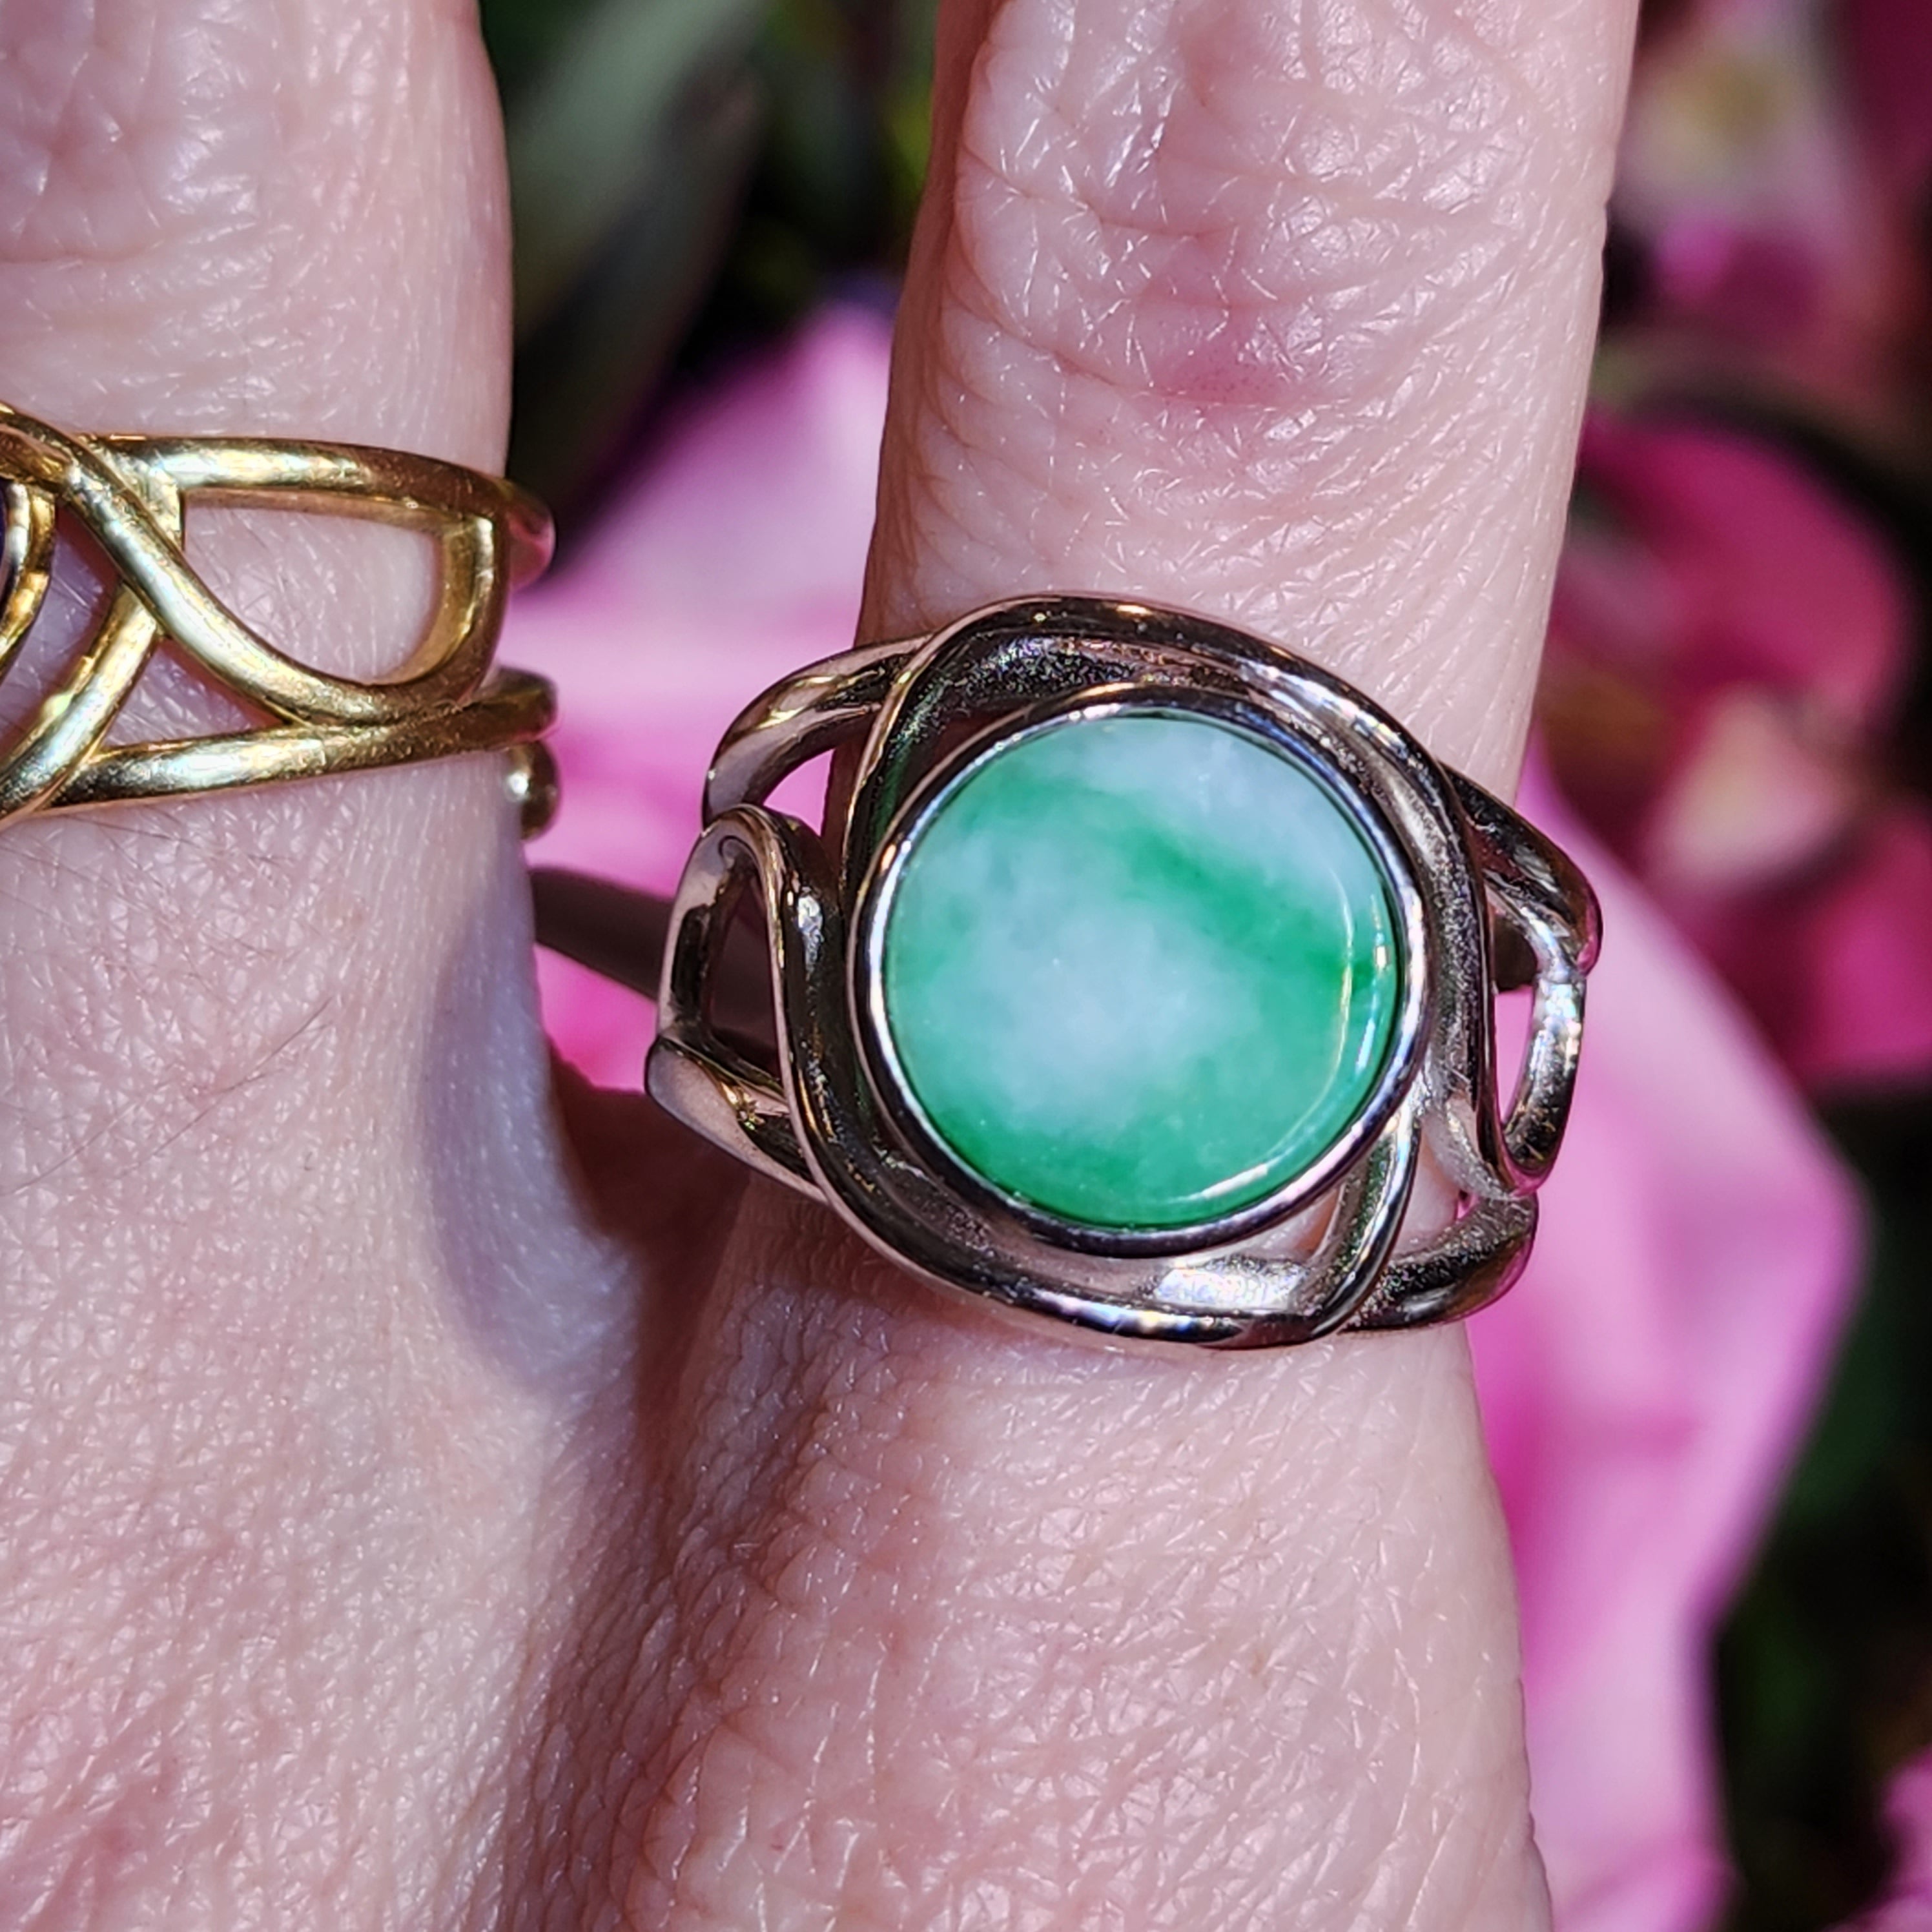 Jadeite Finger Cuff Adjustable Ring .925 Silver for Abundance, Good Luck, Joy and Protection